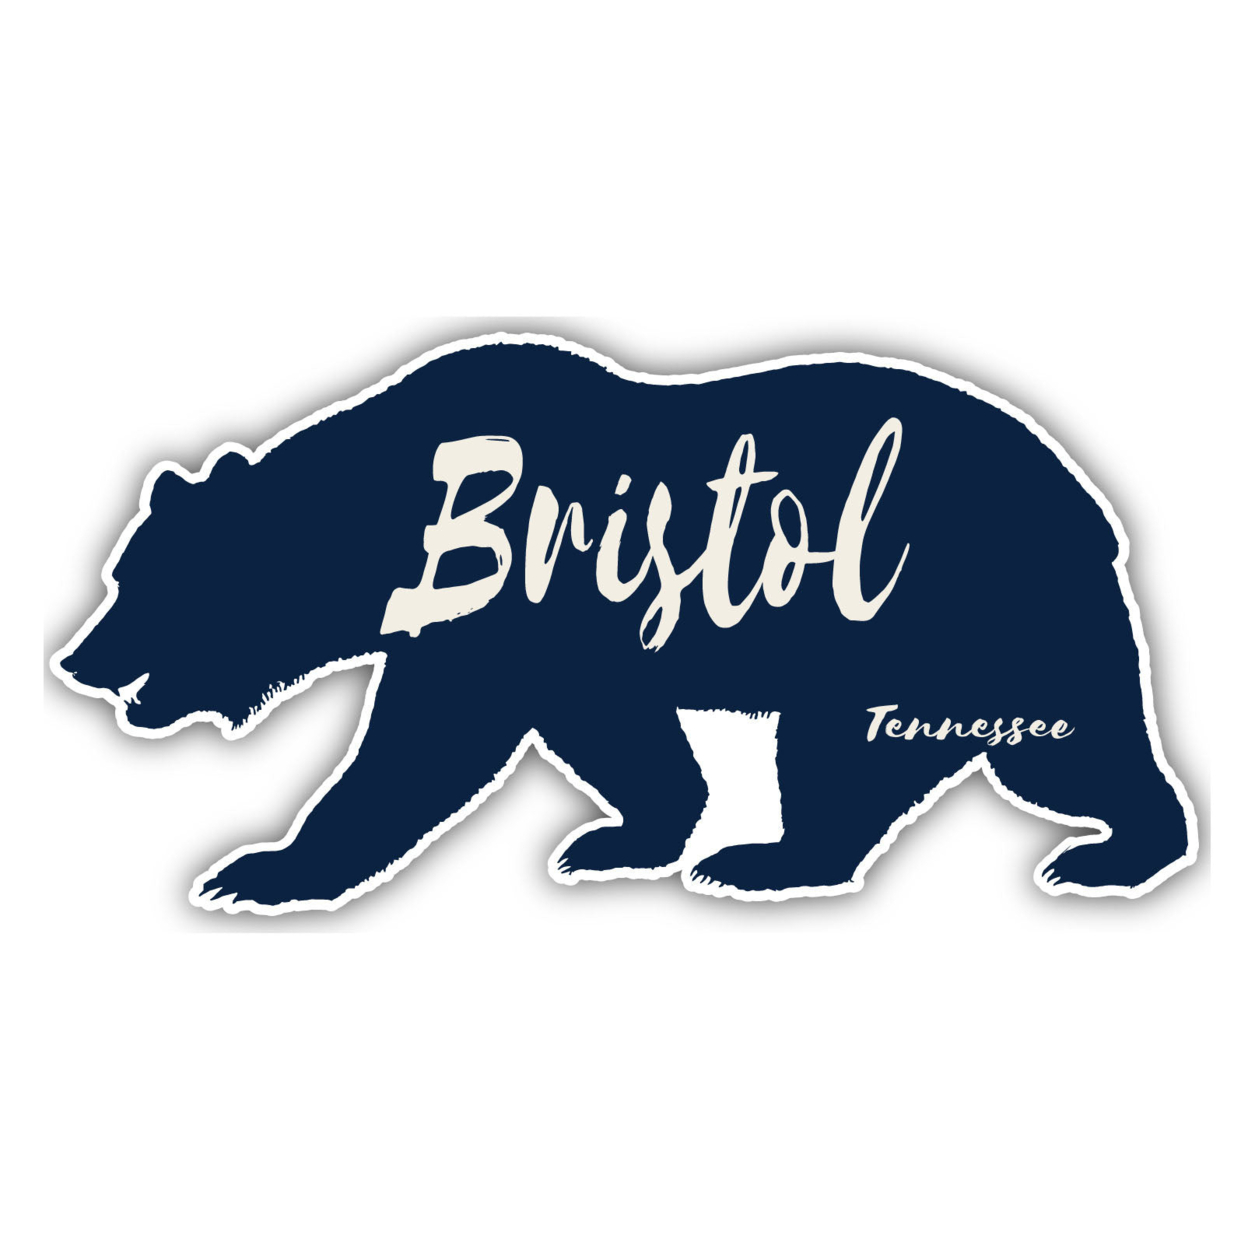 Bristol Tennessee Souvenir Decorative Stickers (Choose Theme And Size) - 4-Pack, 10-Inch, Adventures Awaits